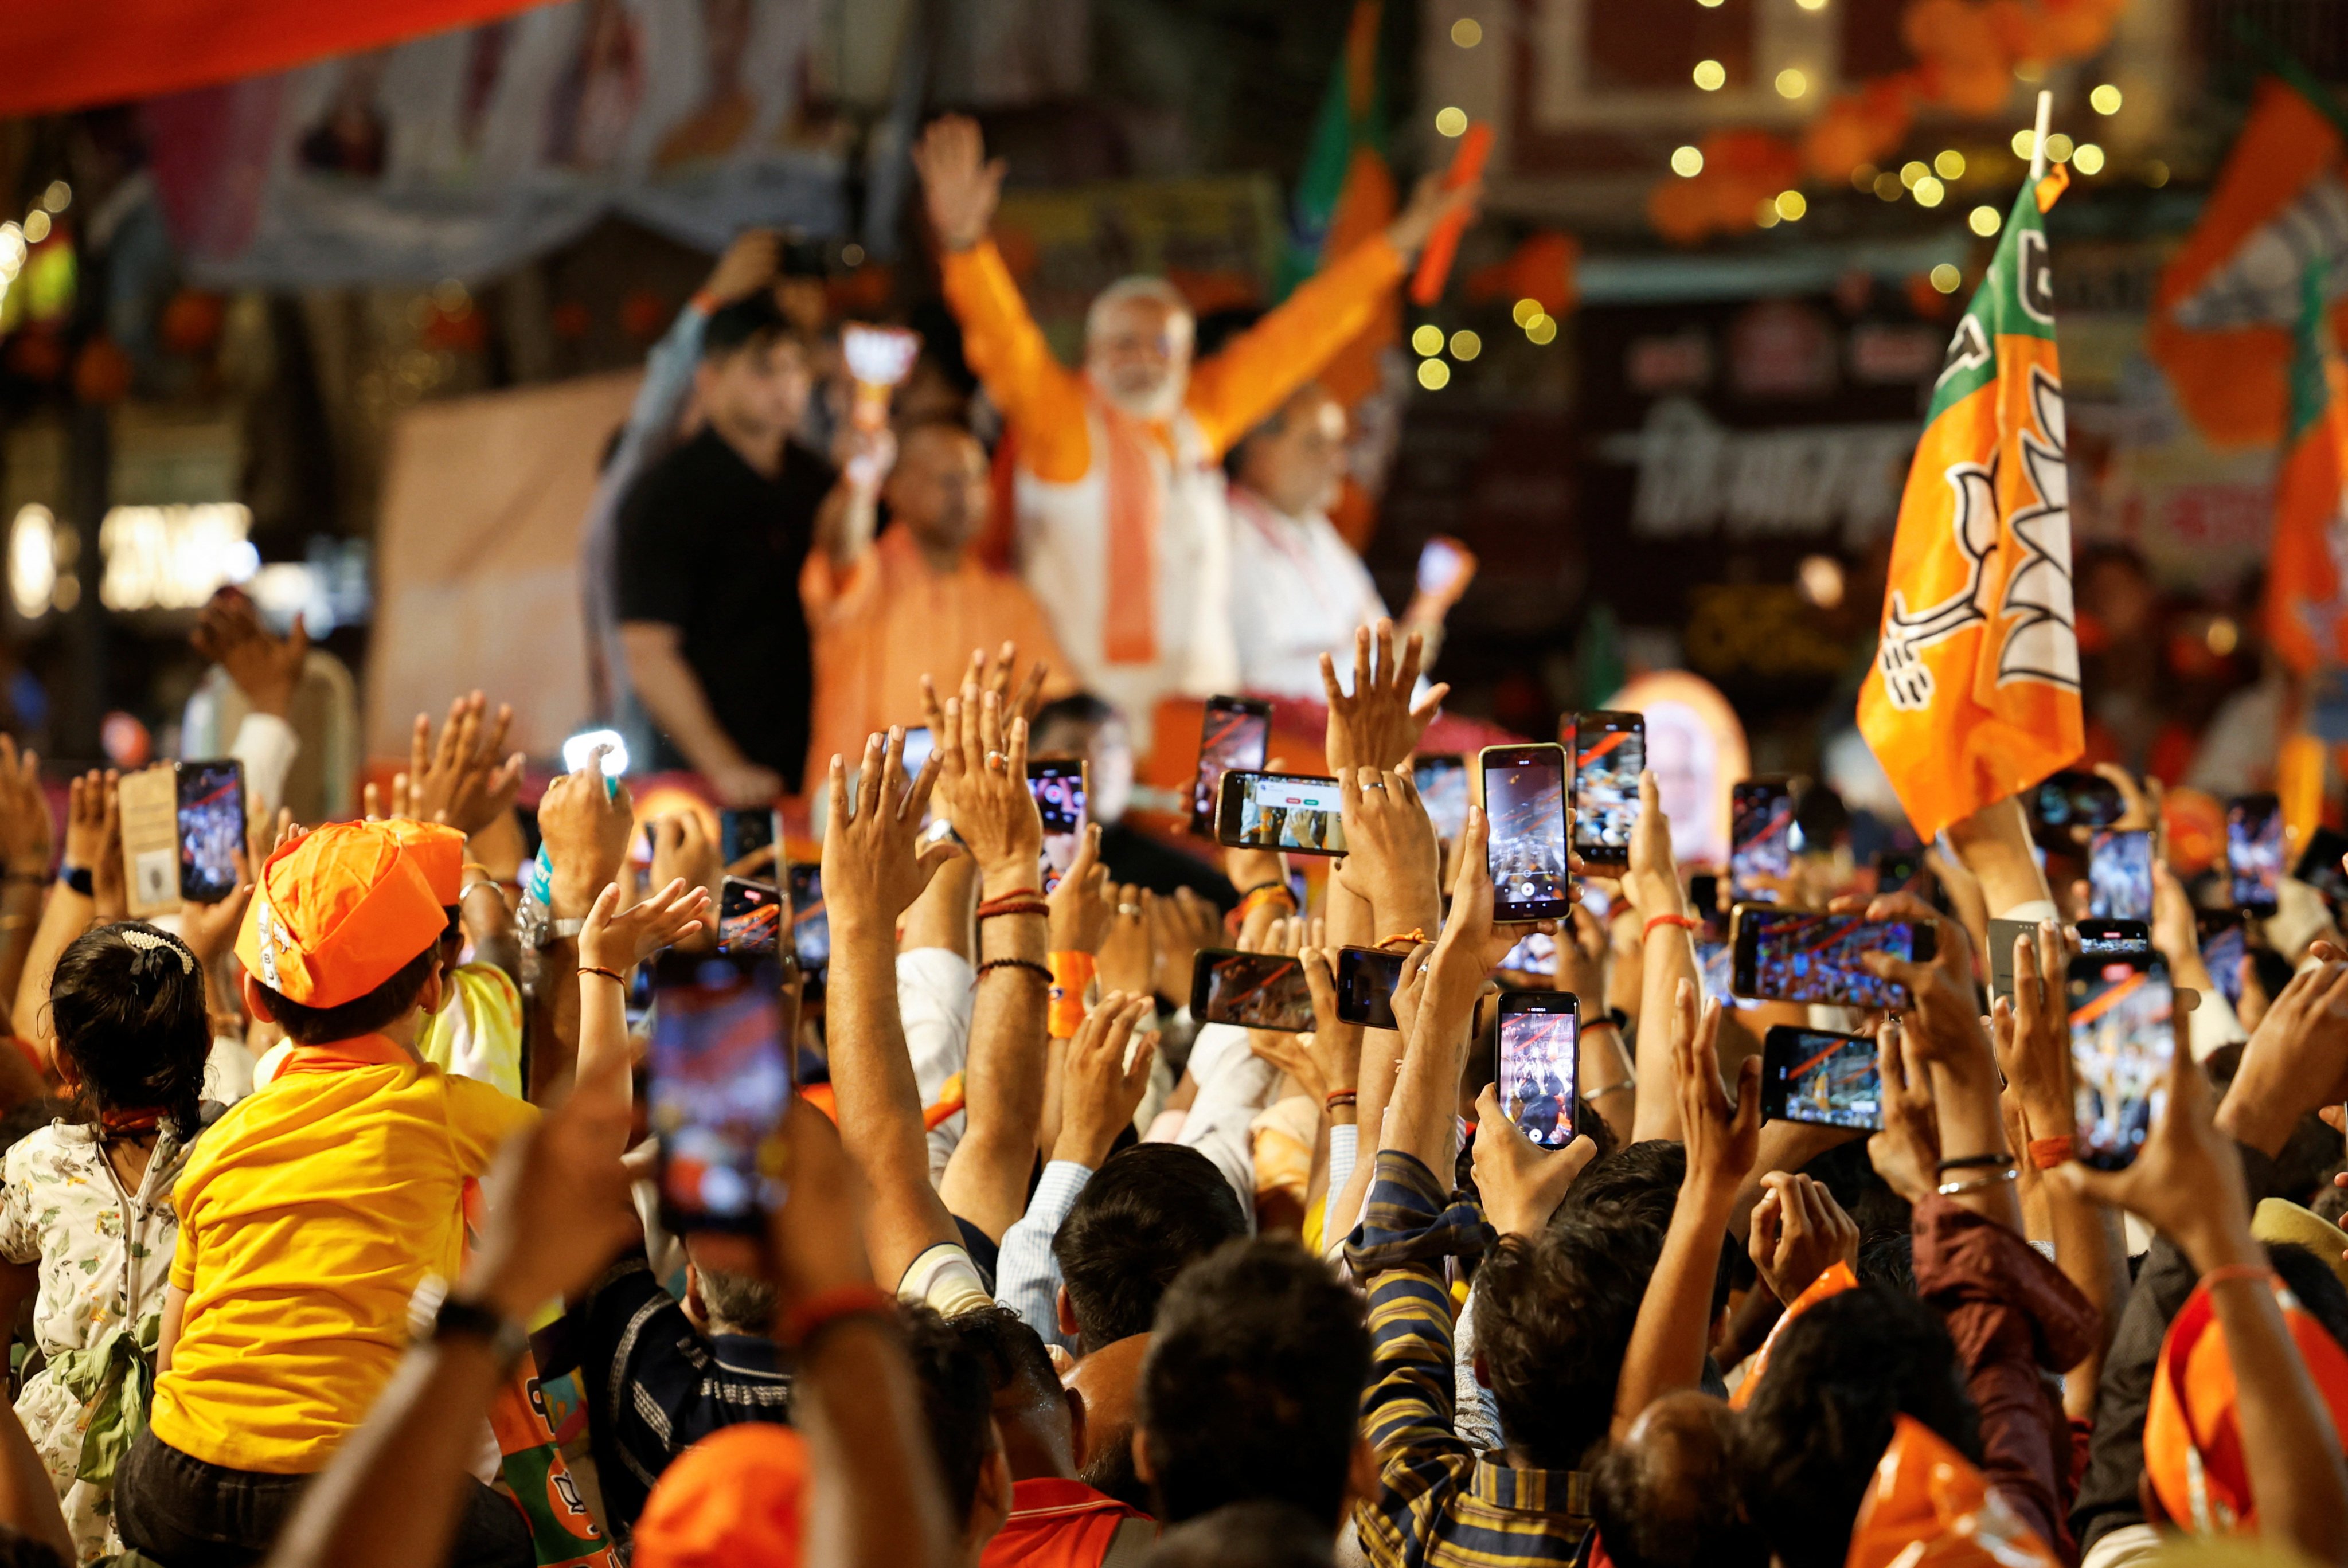 Supporters use their smartphones to take pictures of India’s Prime Minister Narendra Modi during an election roadshow for his ruling Bharatiya Janata Party in Varanasi on May 13. Photo: Reuters